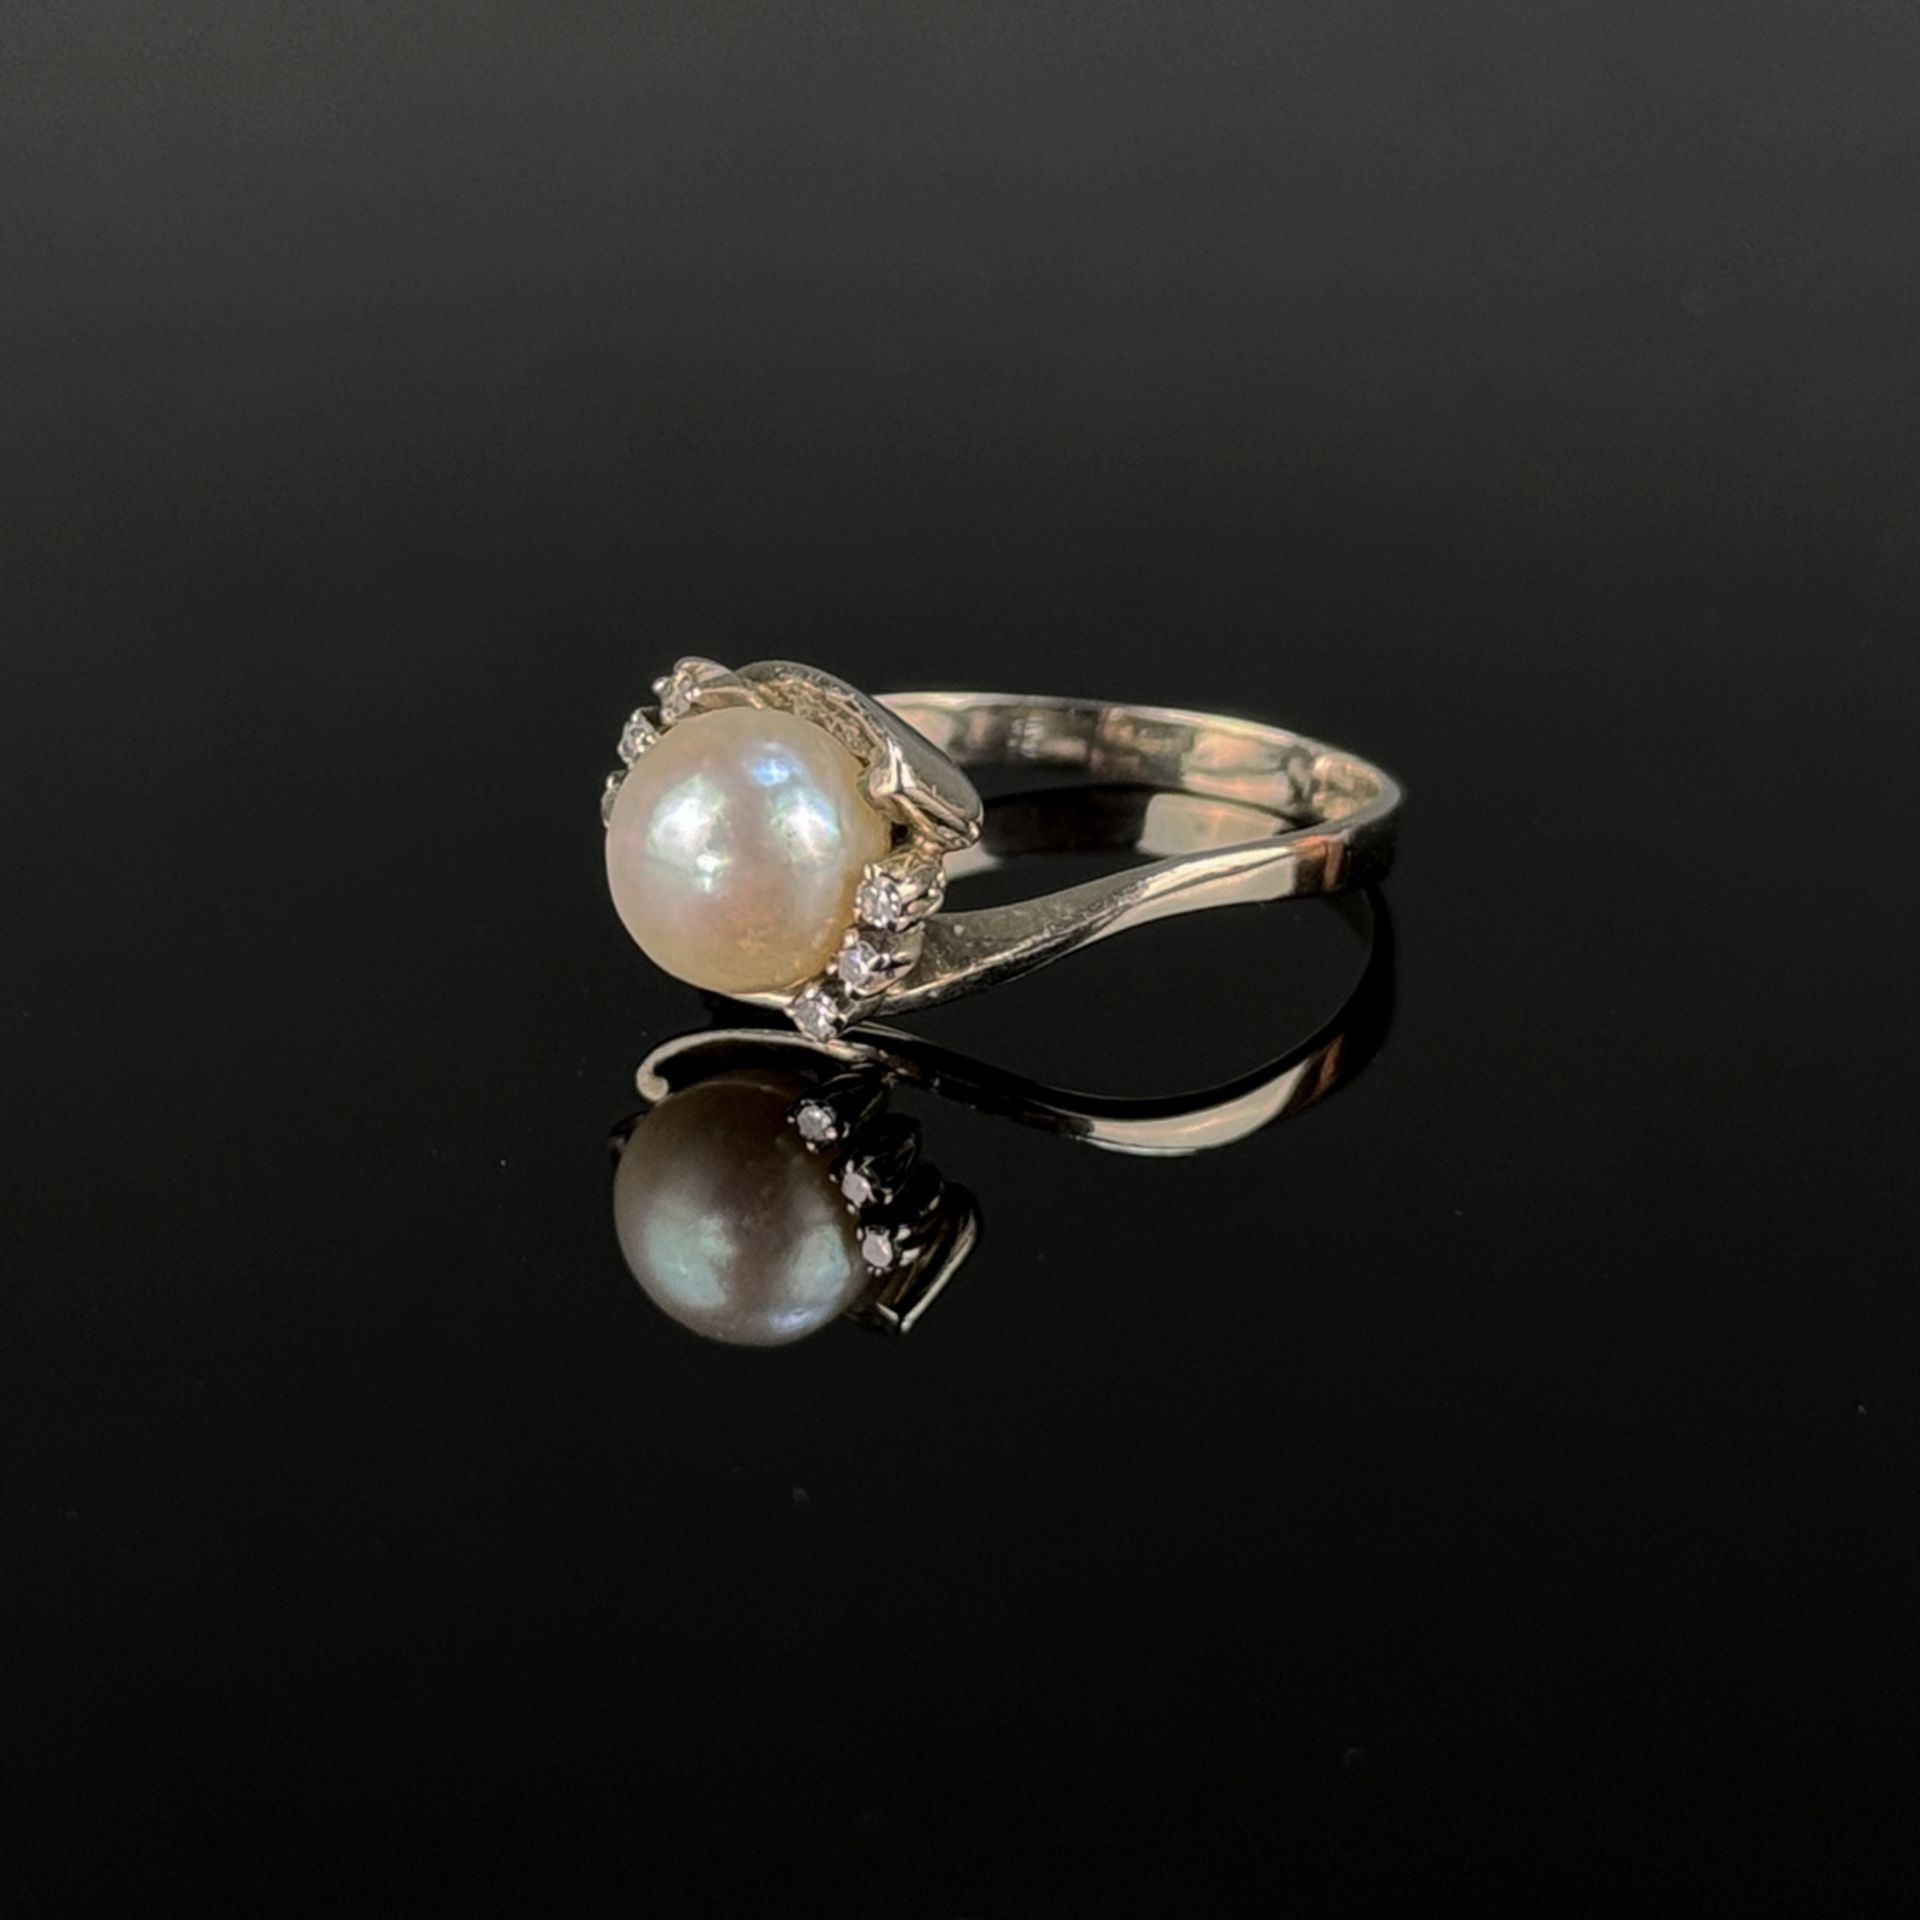 Pearl ring, 585/14K white gold (tested), 3.4g, white lustre pearl in the centre, diameter approx. 7